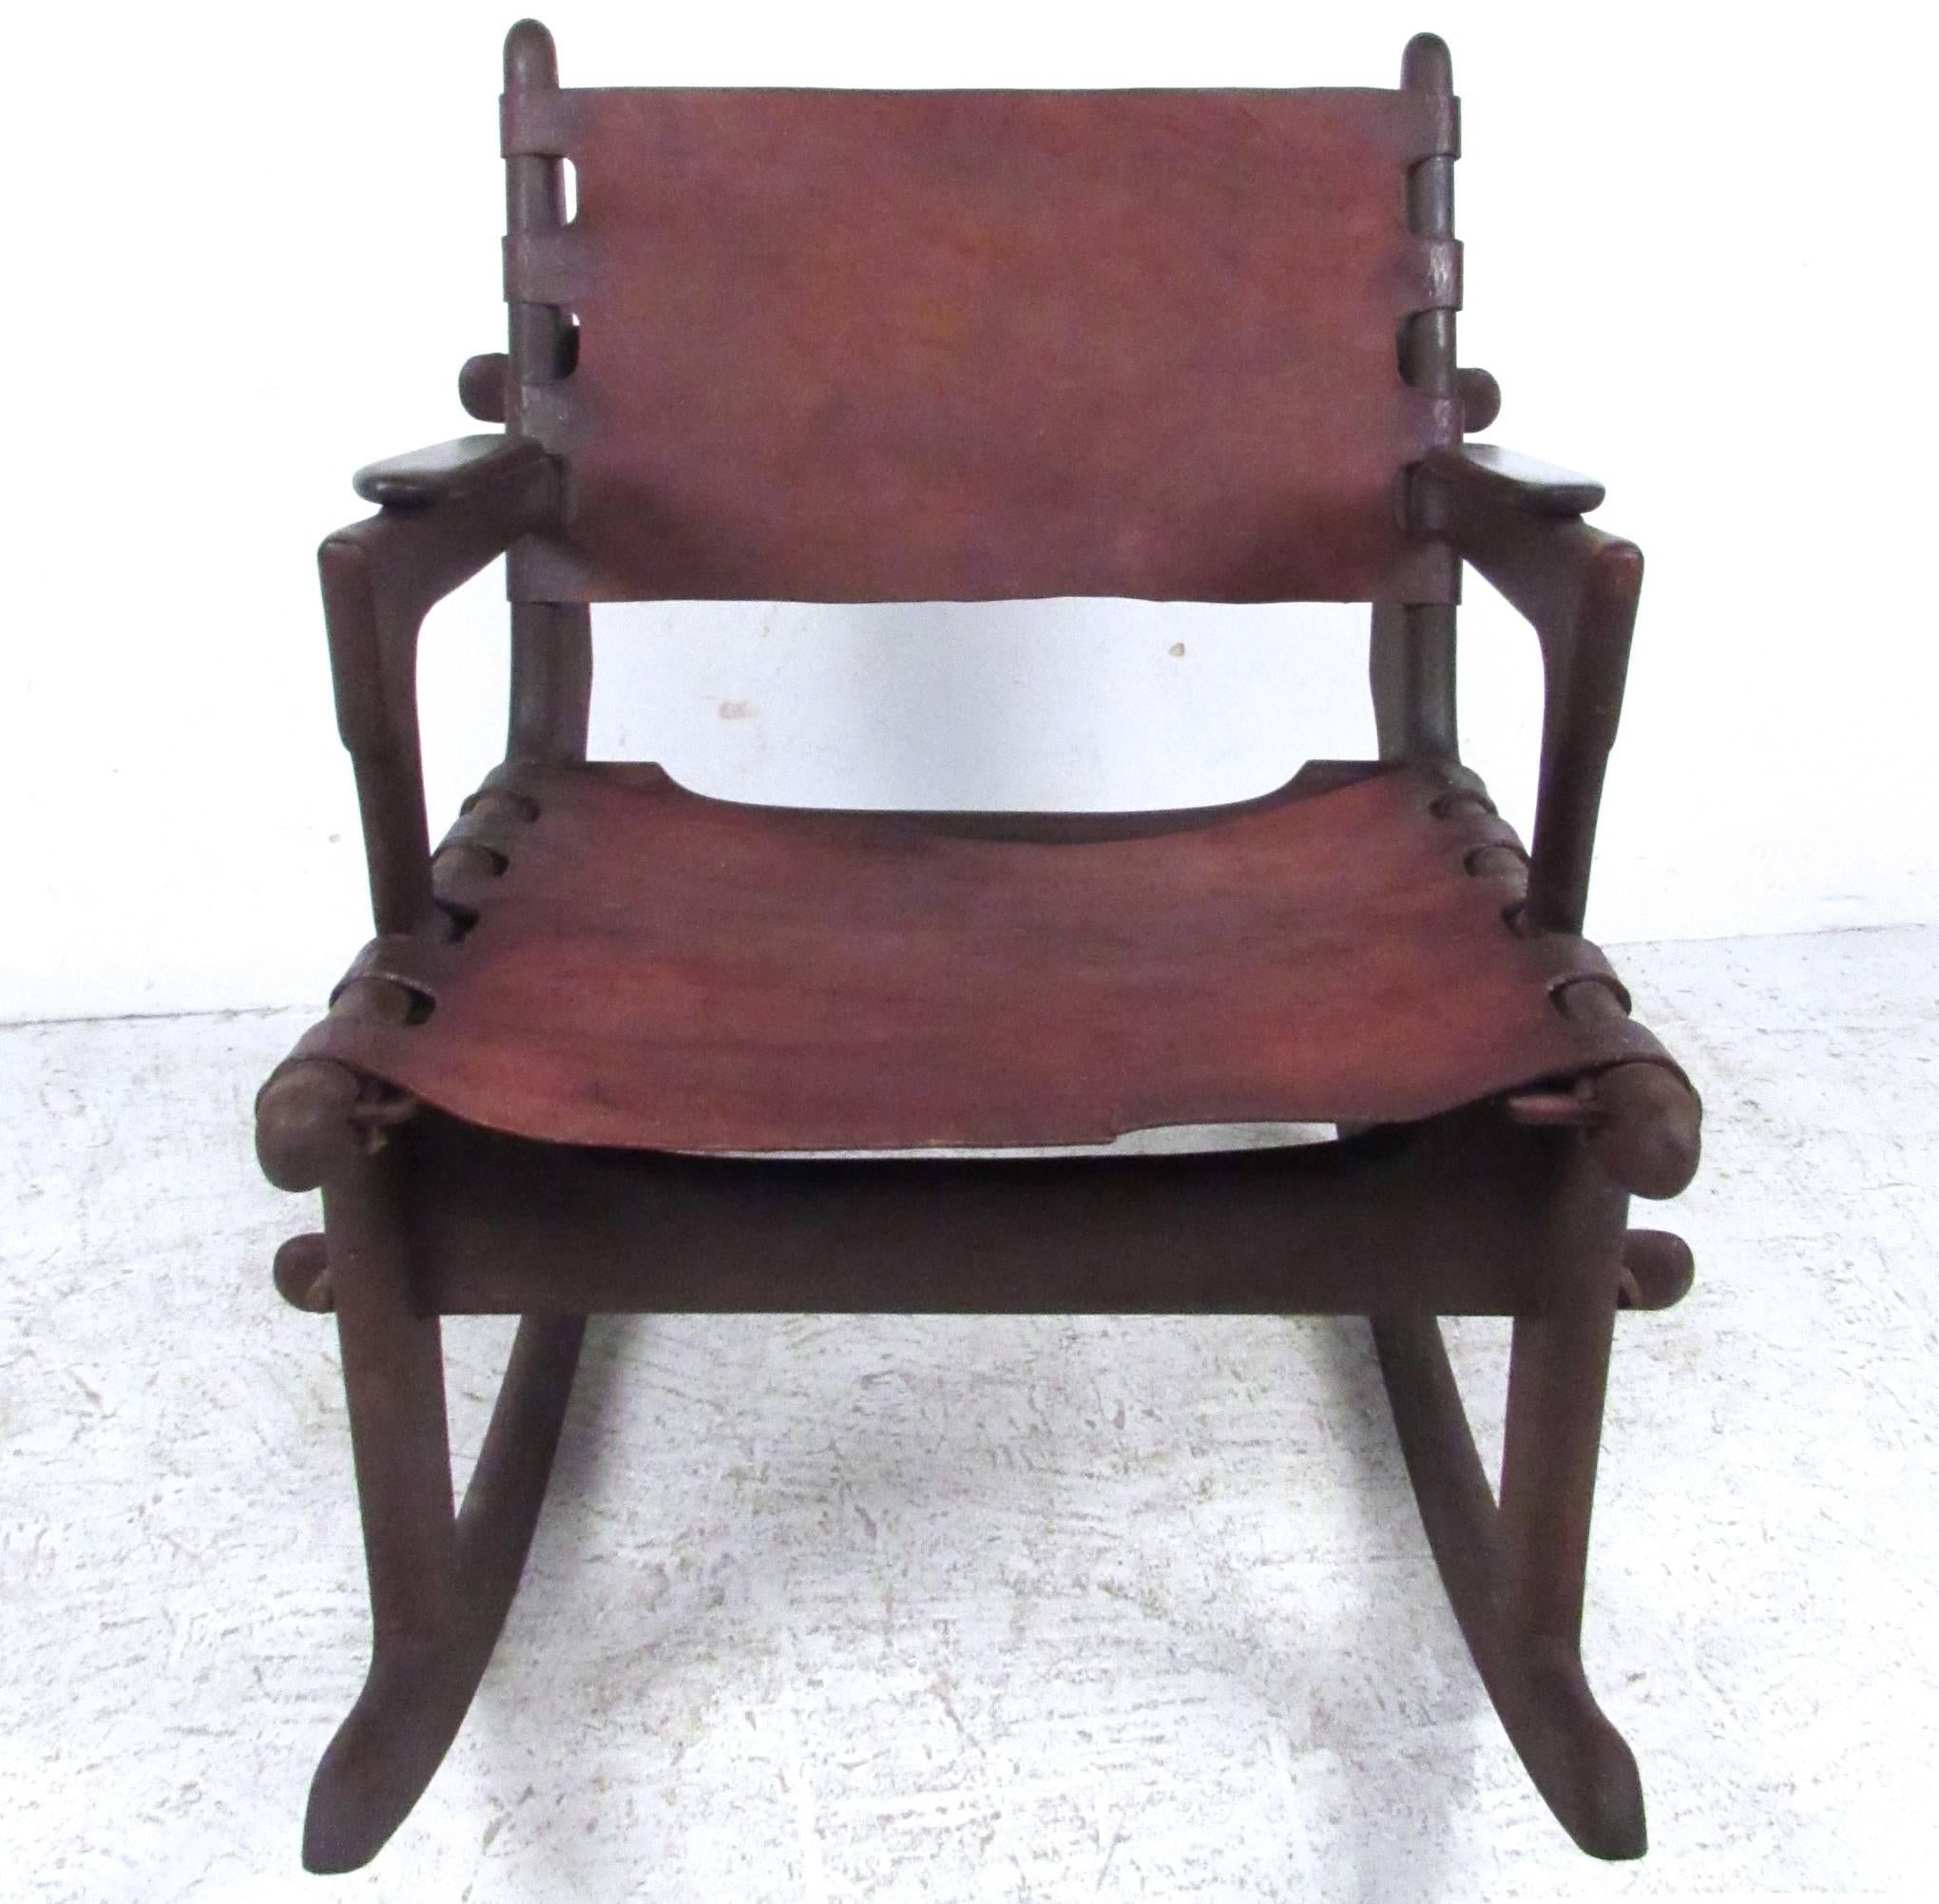 This unique vintage rocking chair by Ecuadorian designer Angel Pazmino features leather seat, and unique dowel construction. A stylish Primitive modern chair in any setting. Please confirm item location (NY or NJ).